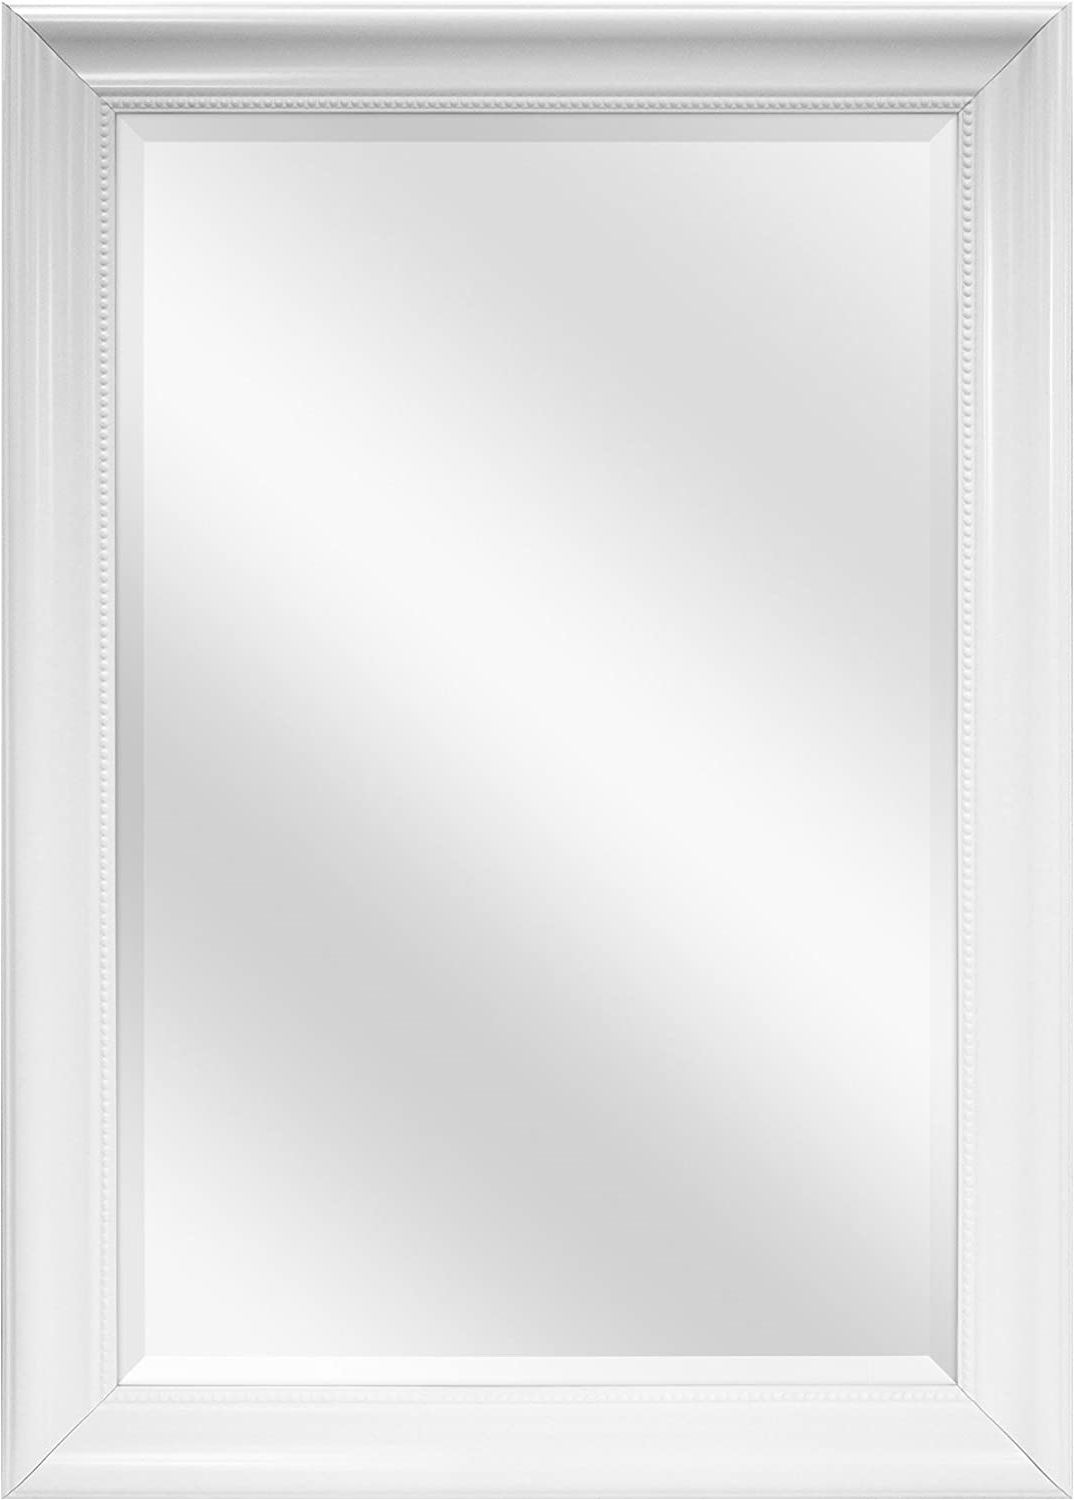 Newest Mcs White Beaded Rectangular Wall Mirror, 30 Inch42 Inch , New For Black Beaded Rectangular Wall Mirrors (View 5 of 15)